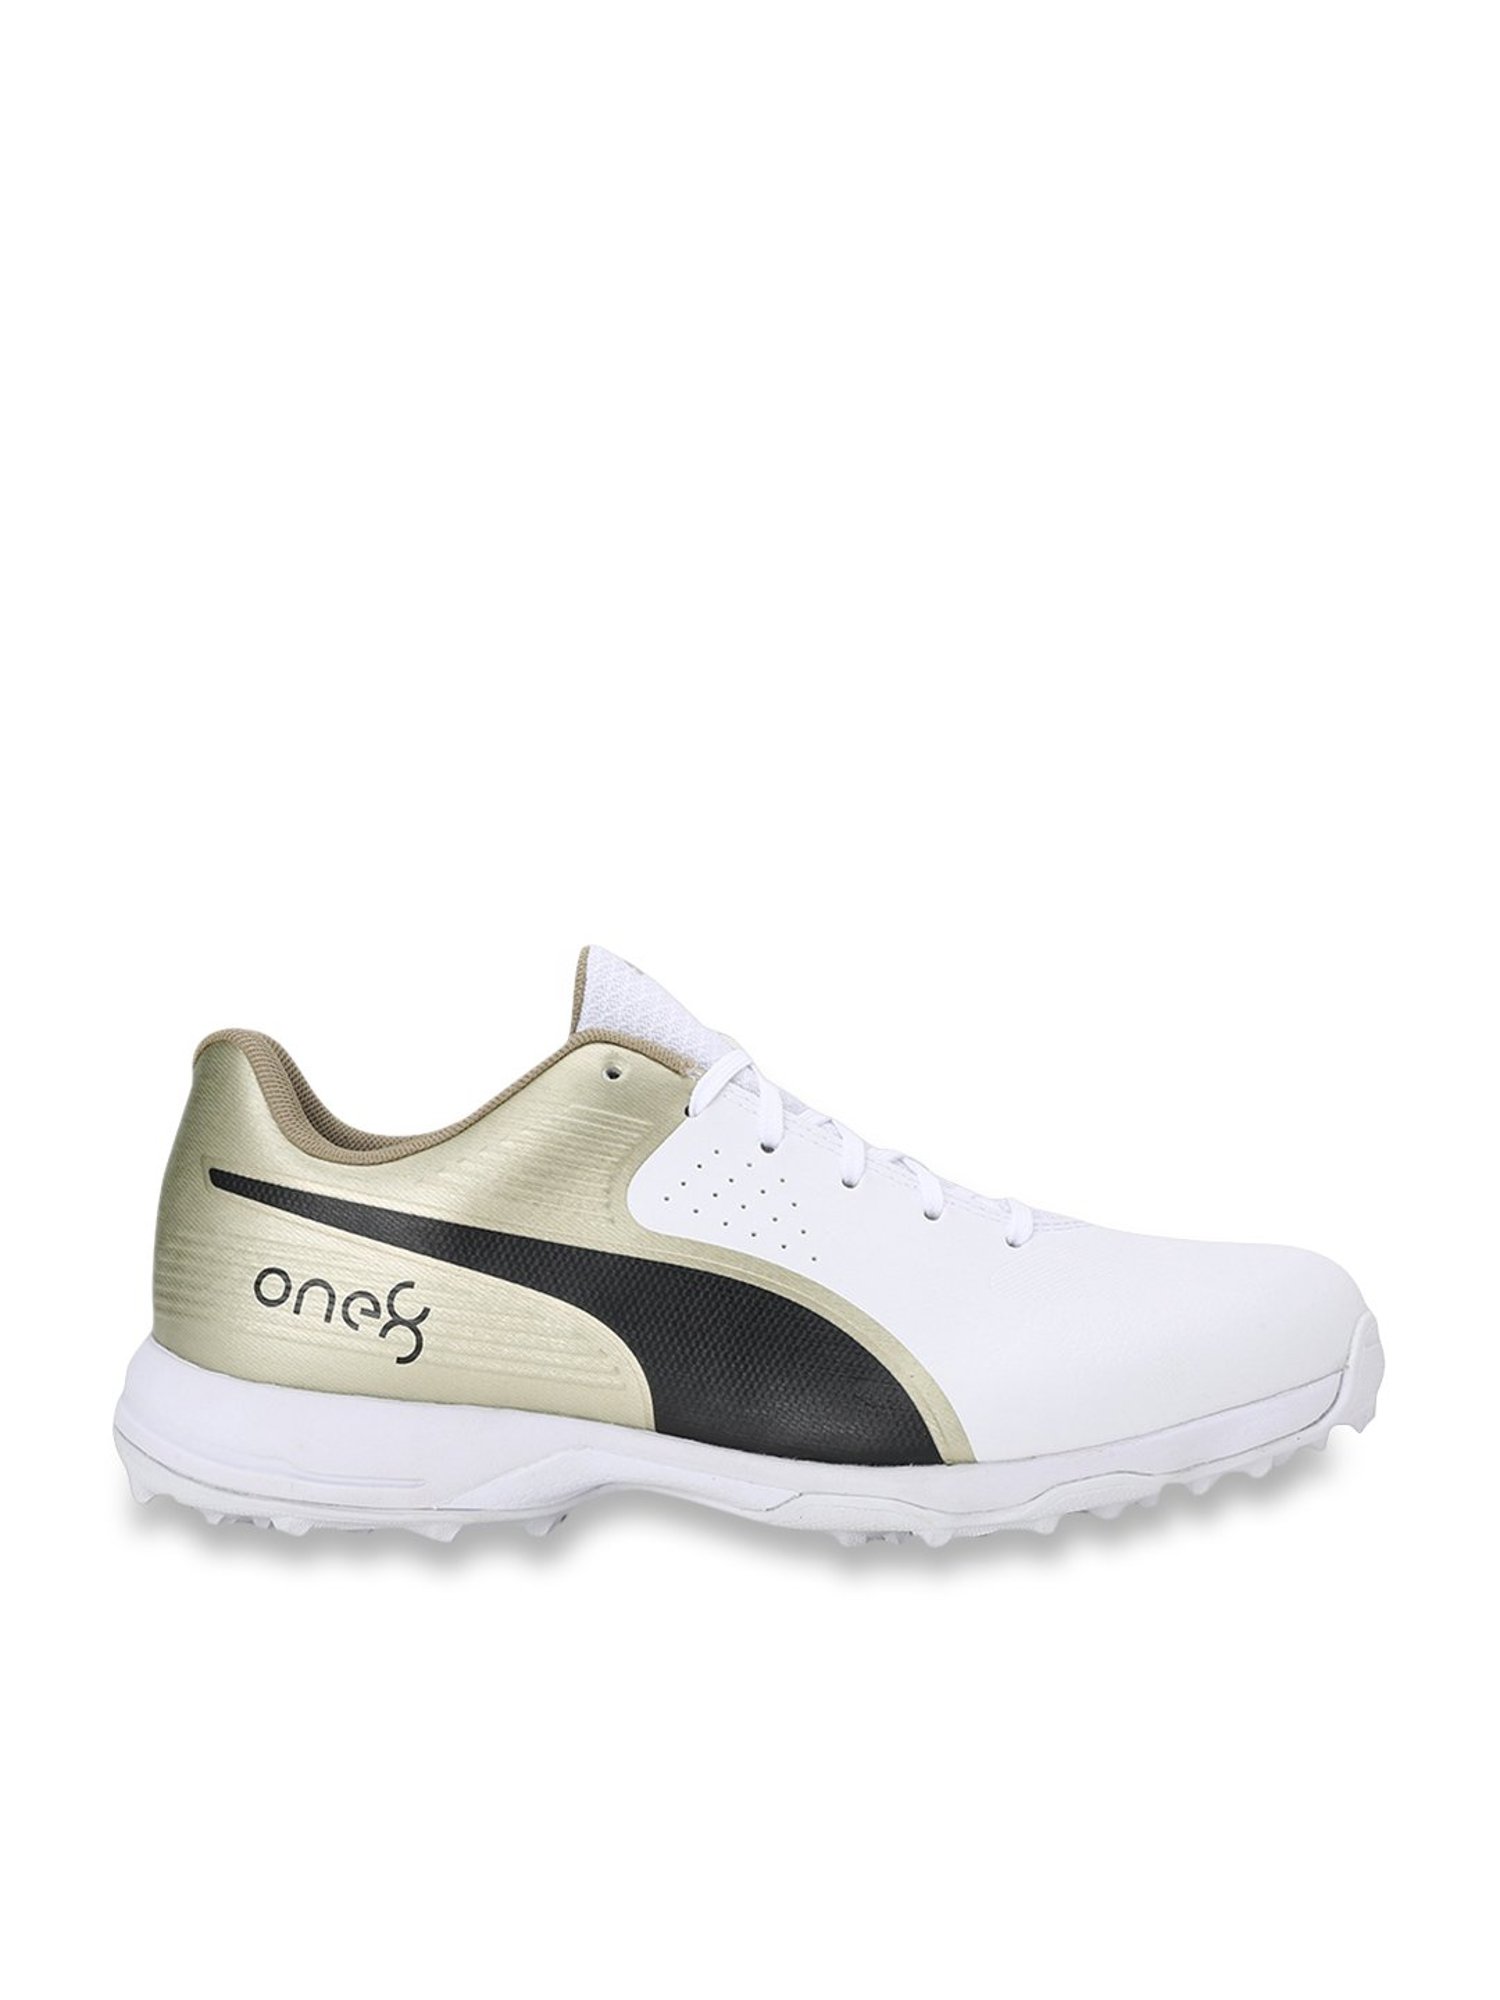 puma one8 gold shoes price